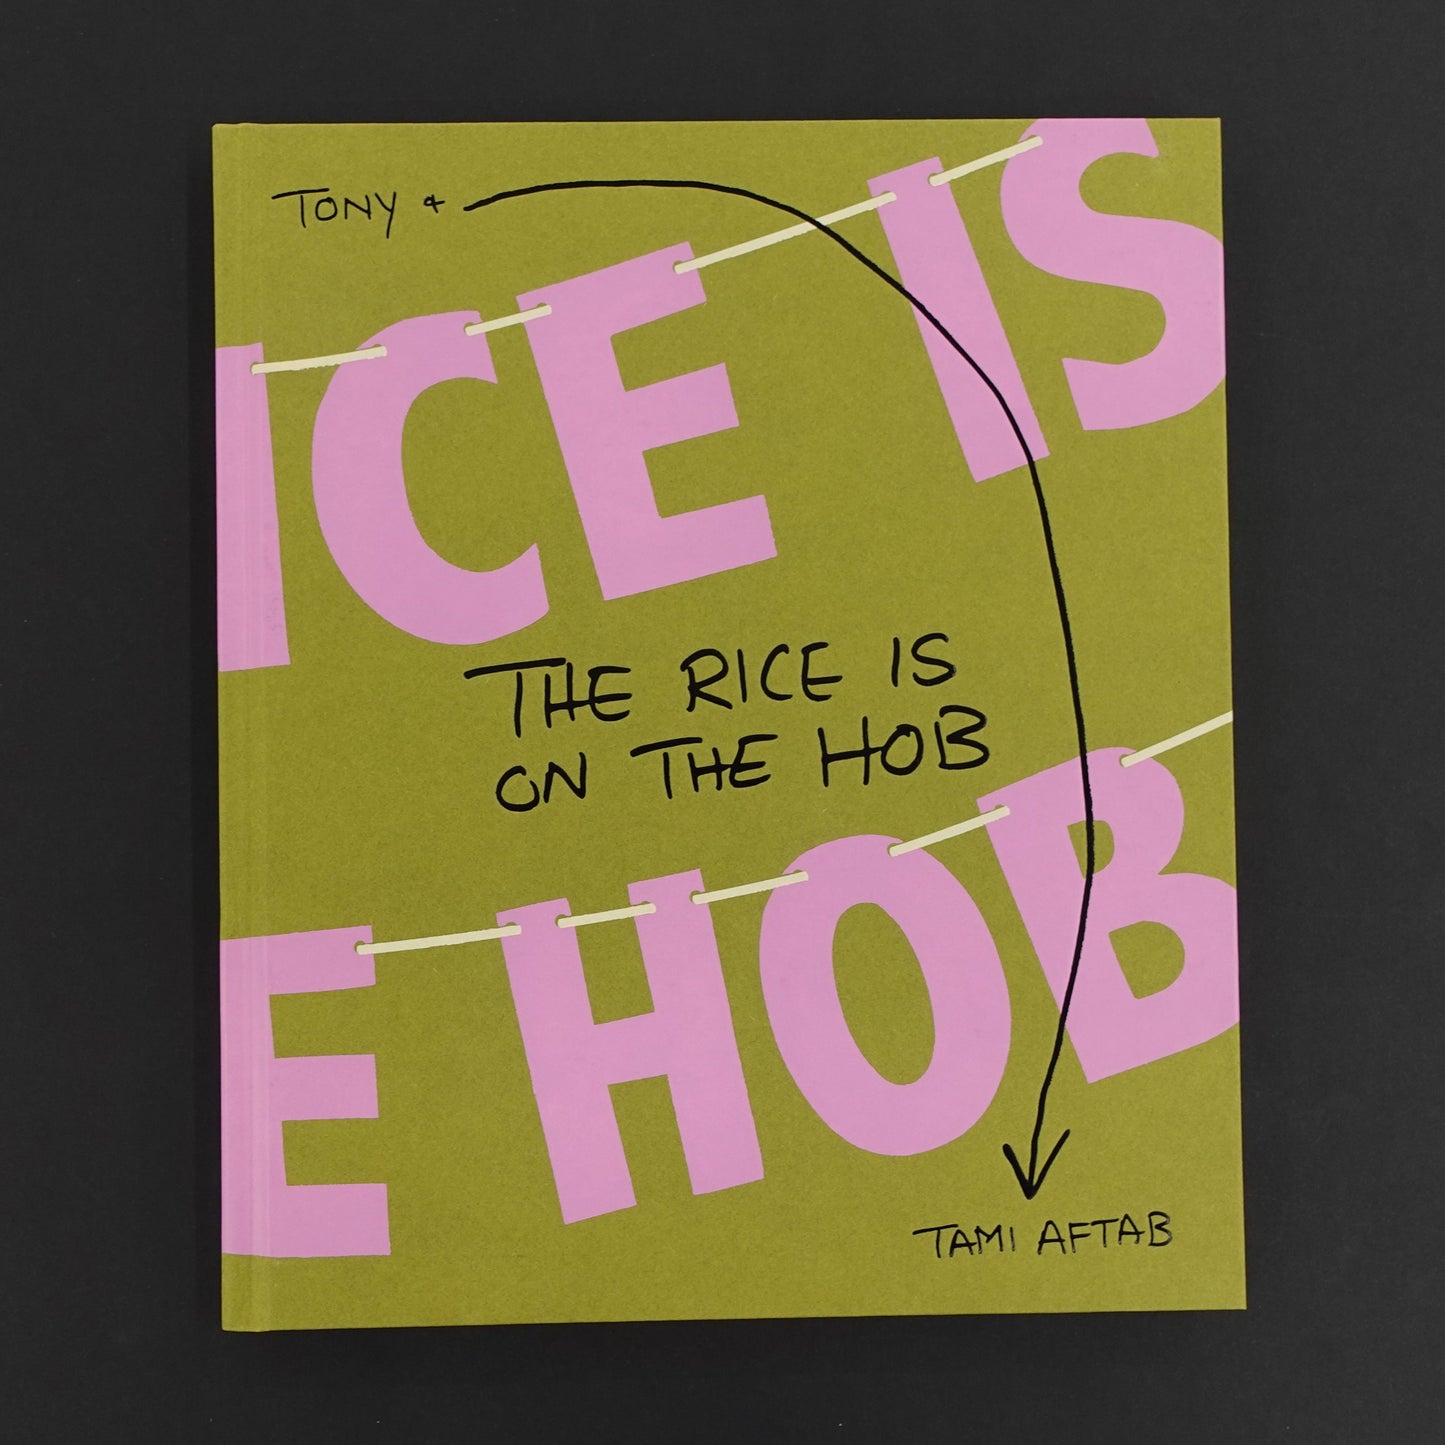 THE RICE IS ON THE HOB BY TONY & TAMI AFTAB